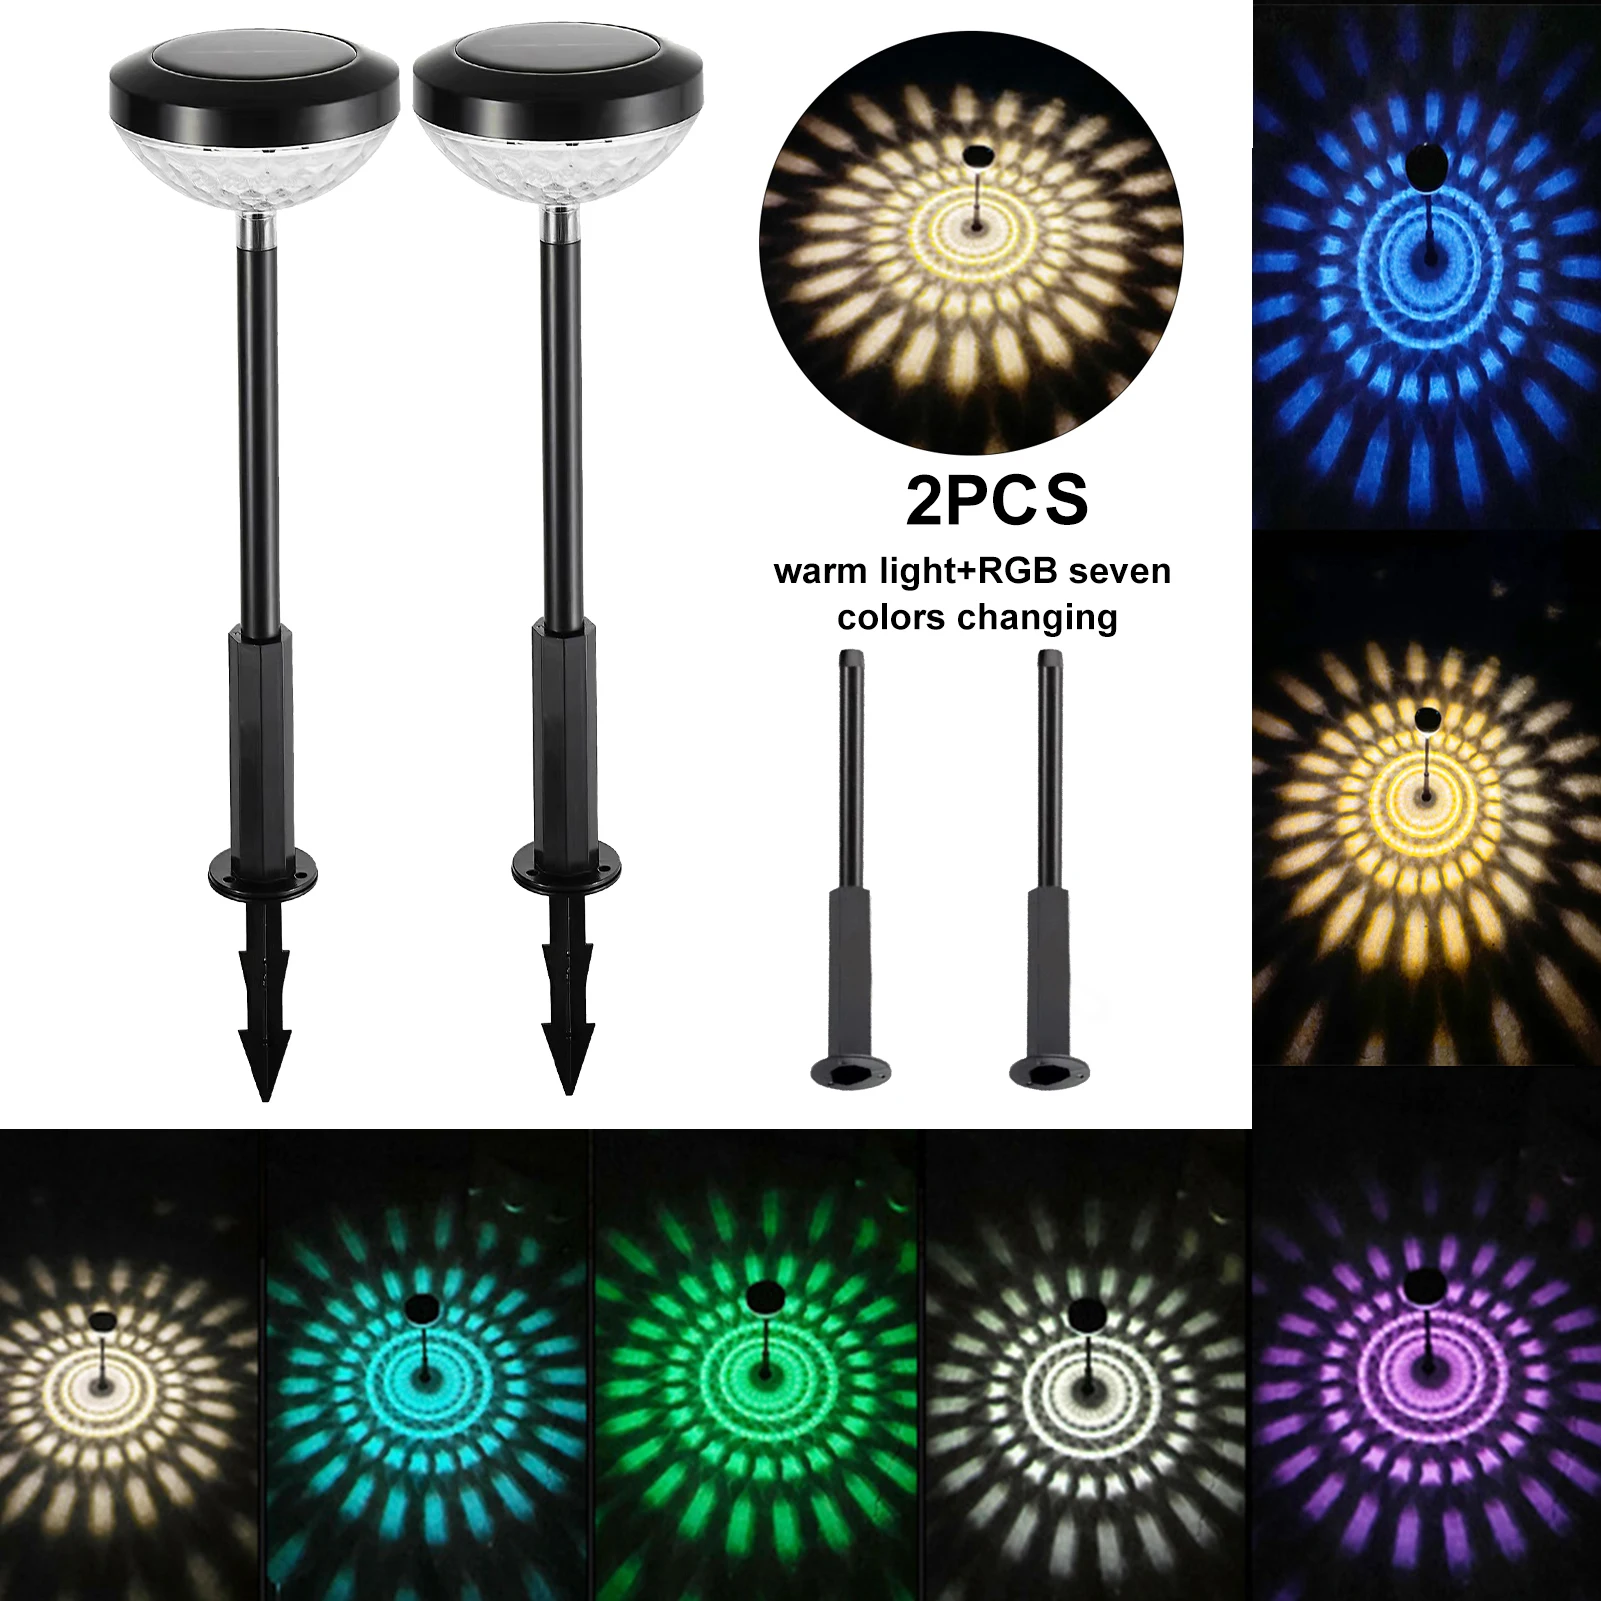 

2pcs/pack Auto On Off Pathway Landscape Ground Stake Garden Light Yard Lawn Solar Powered Shine Projection 2 Adjustable Modes